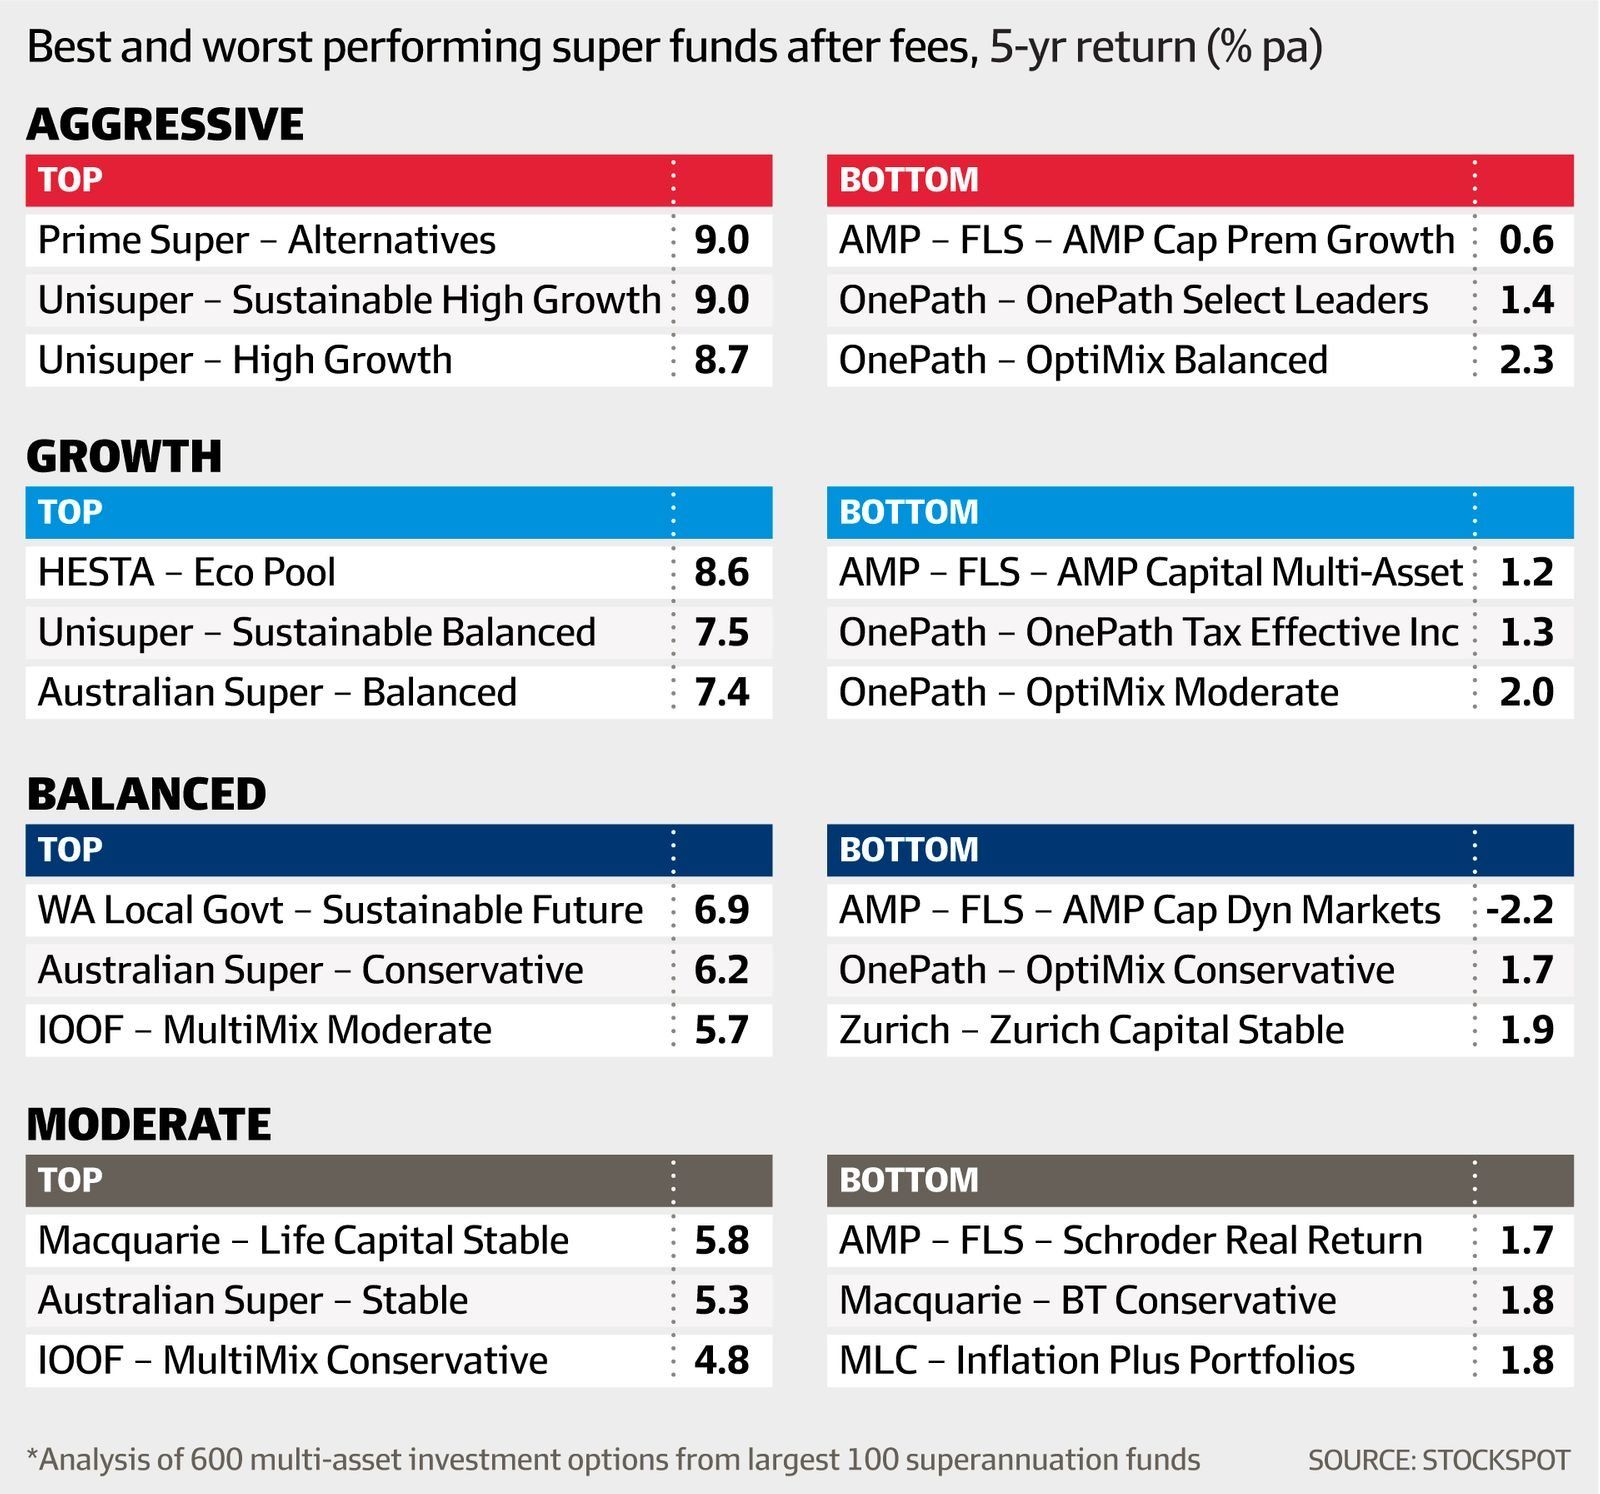 The best performing superfunds